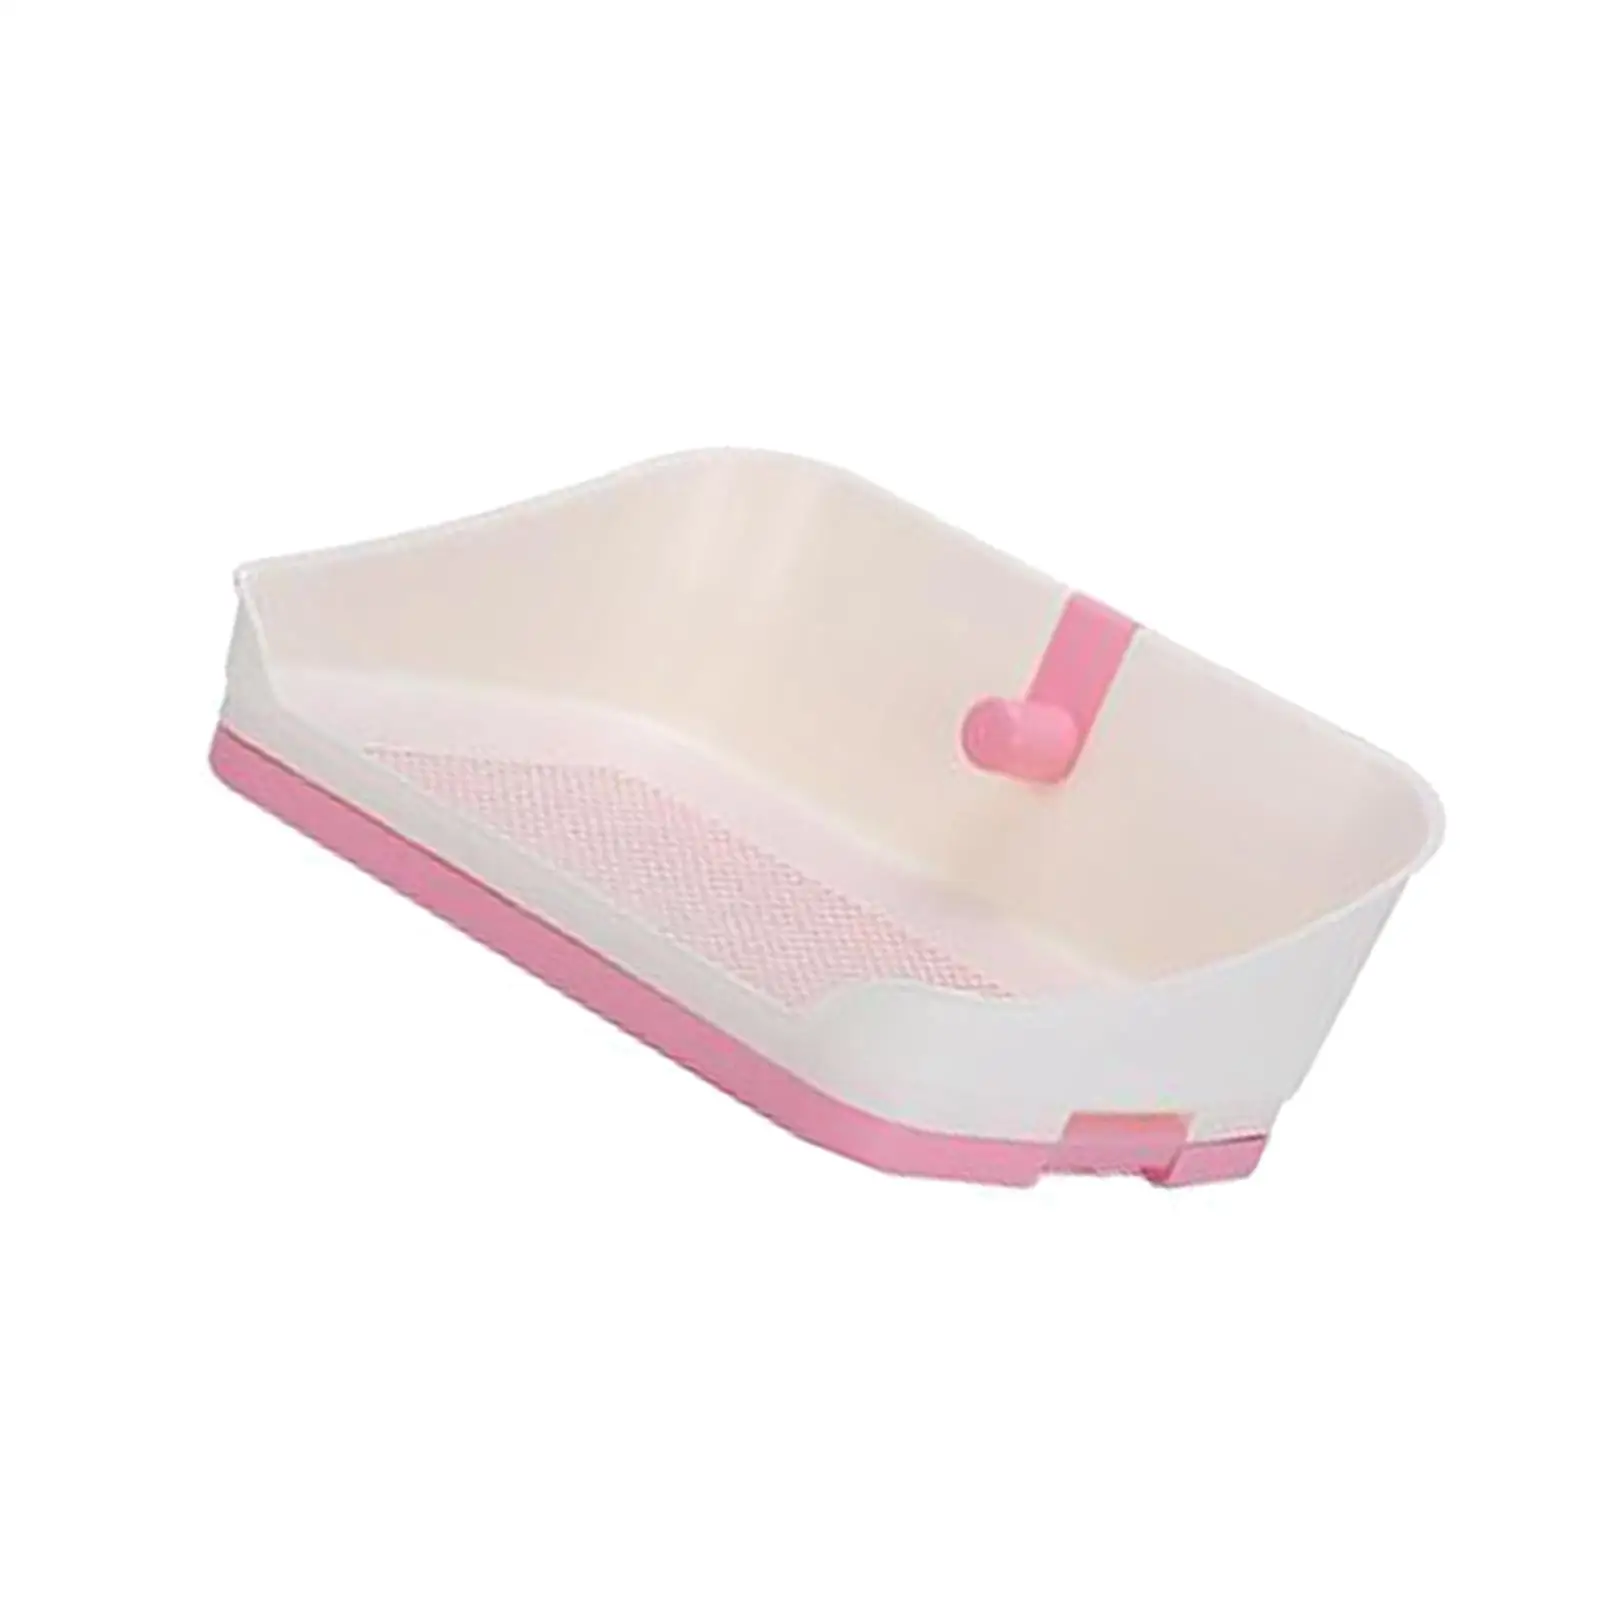 Dog Toilet Keep Paws and Floors Clean Training Toilet Tray for Small and Medium Dogs